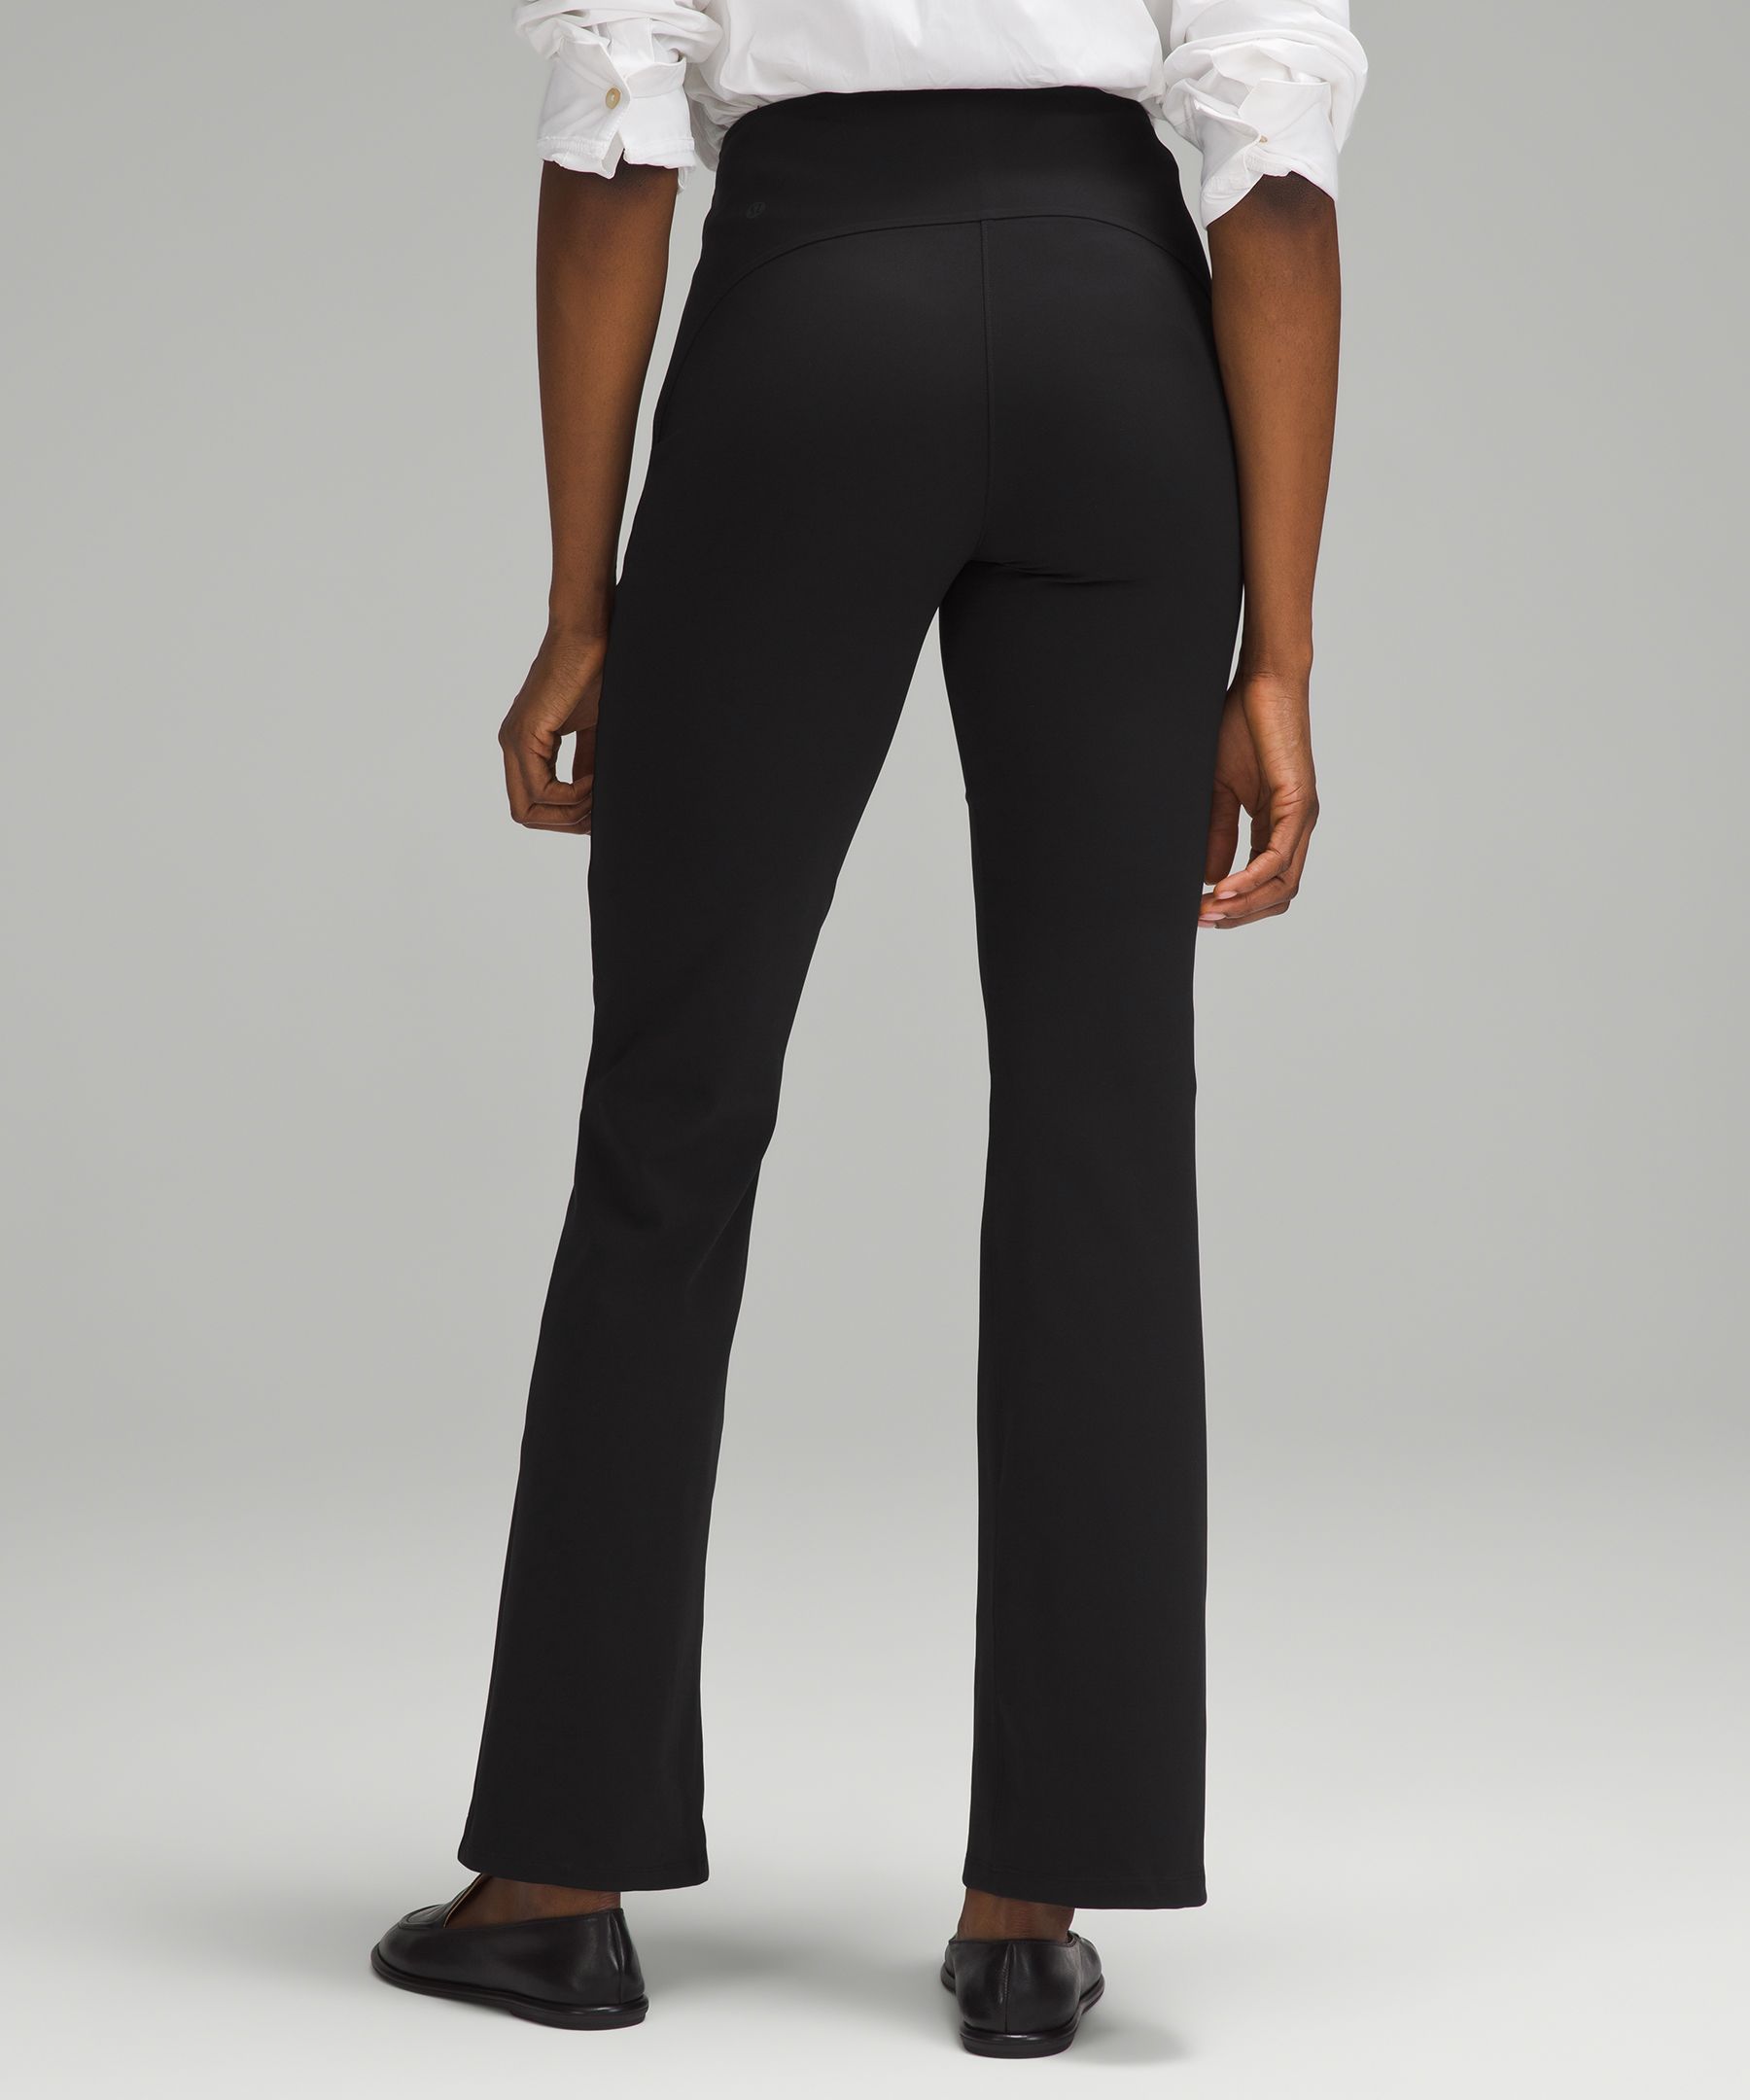 Lululemon athletica Smooth Fit Pull-On High-Rise Pant, Women's Trousers